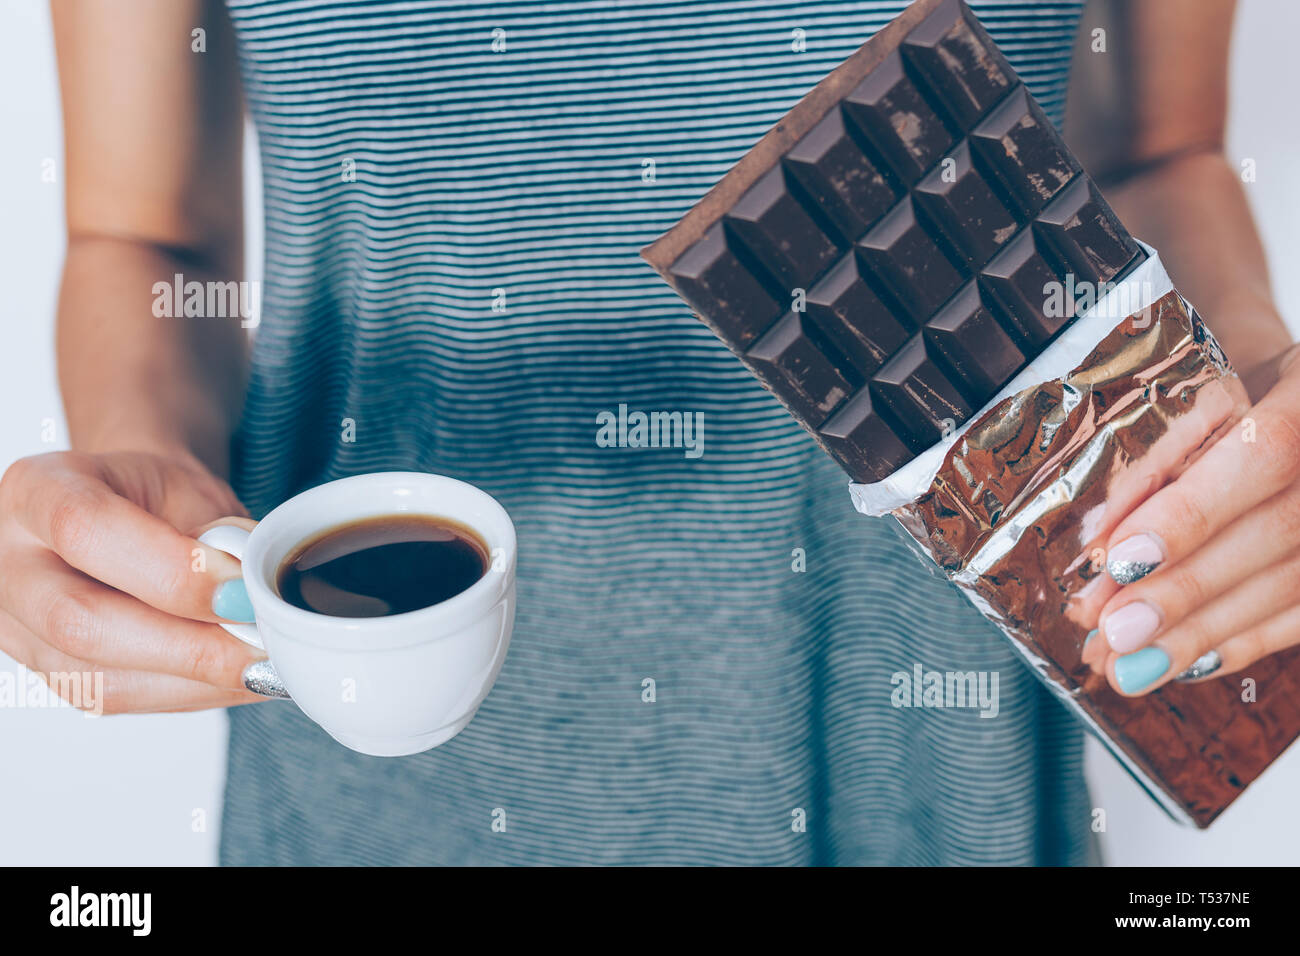 Female's hands holding unwrapped chocolate bar in foil and cup of fresh espresso, close-up. Close-up young woman with cocoa dessert and coffee. Stock Photo